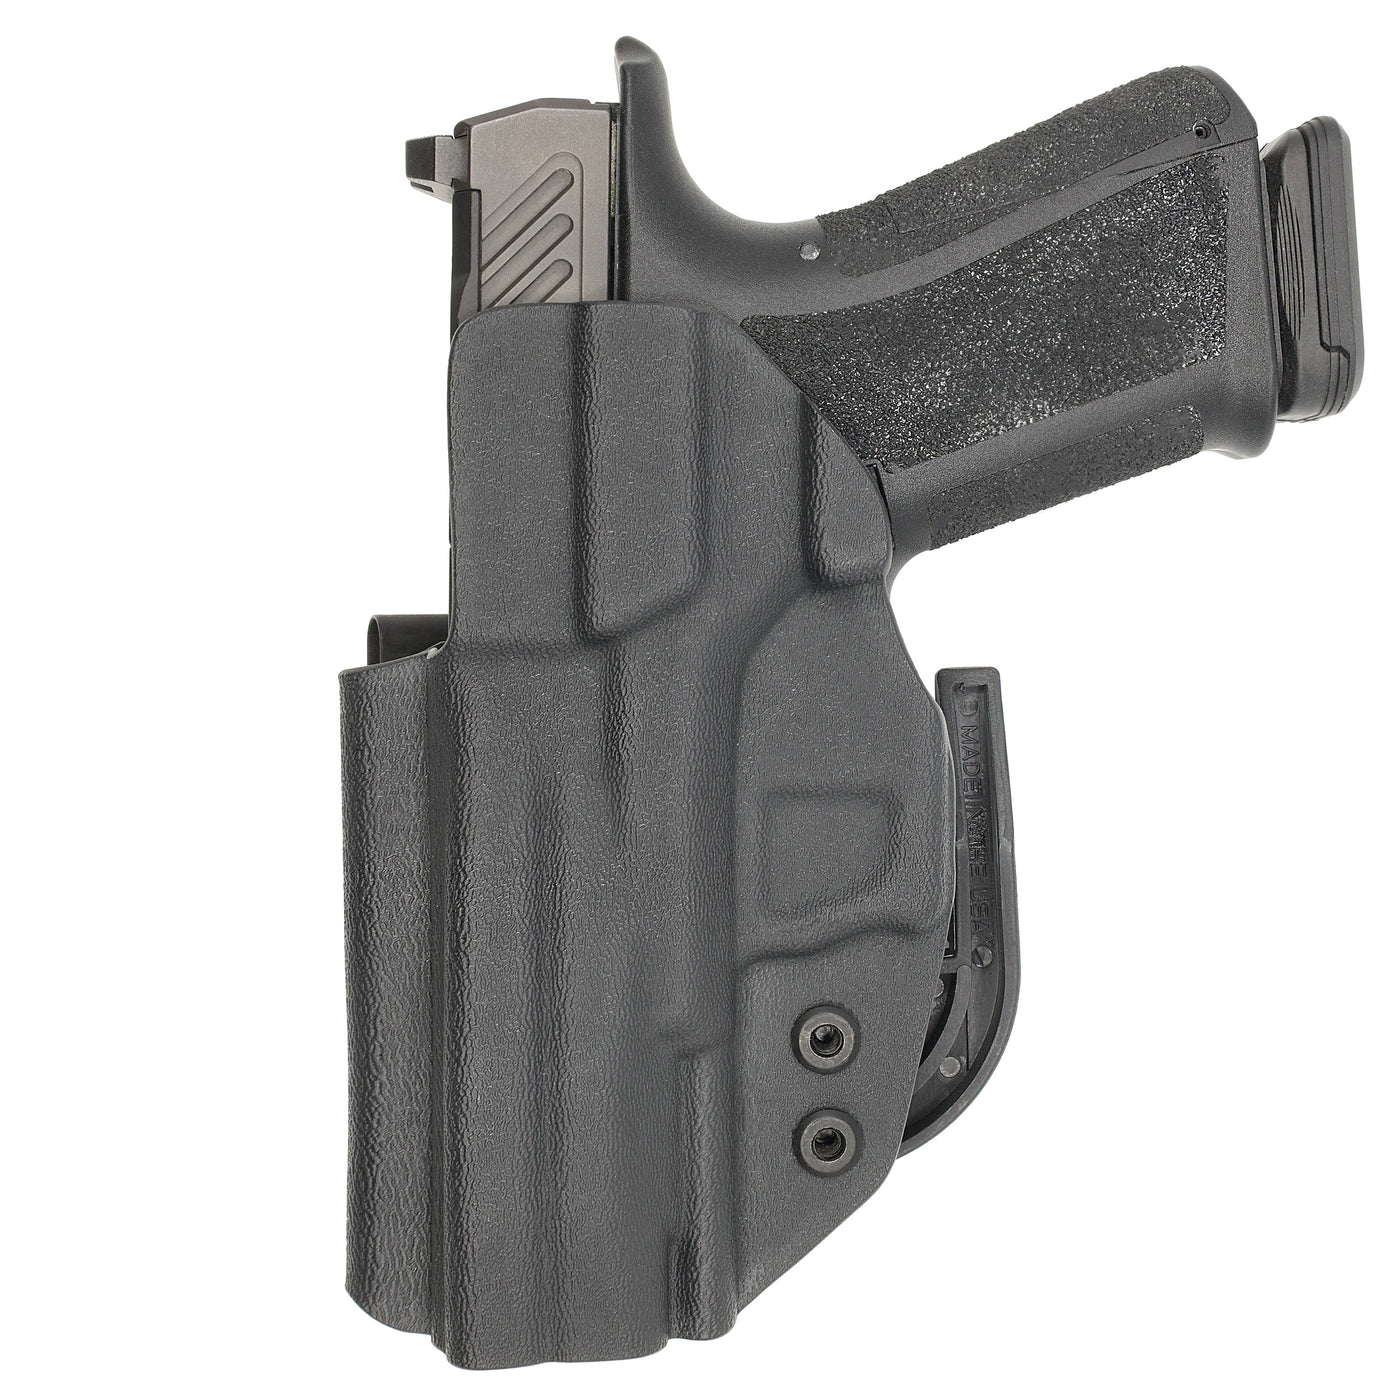 C&G Holsters Quickship IWB ALPHA UPGRADE Covert Shadow Systems MR920 holstered back view